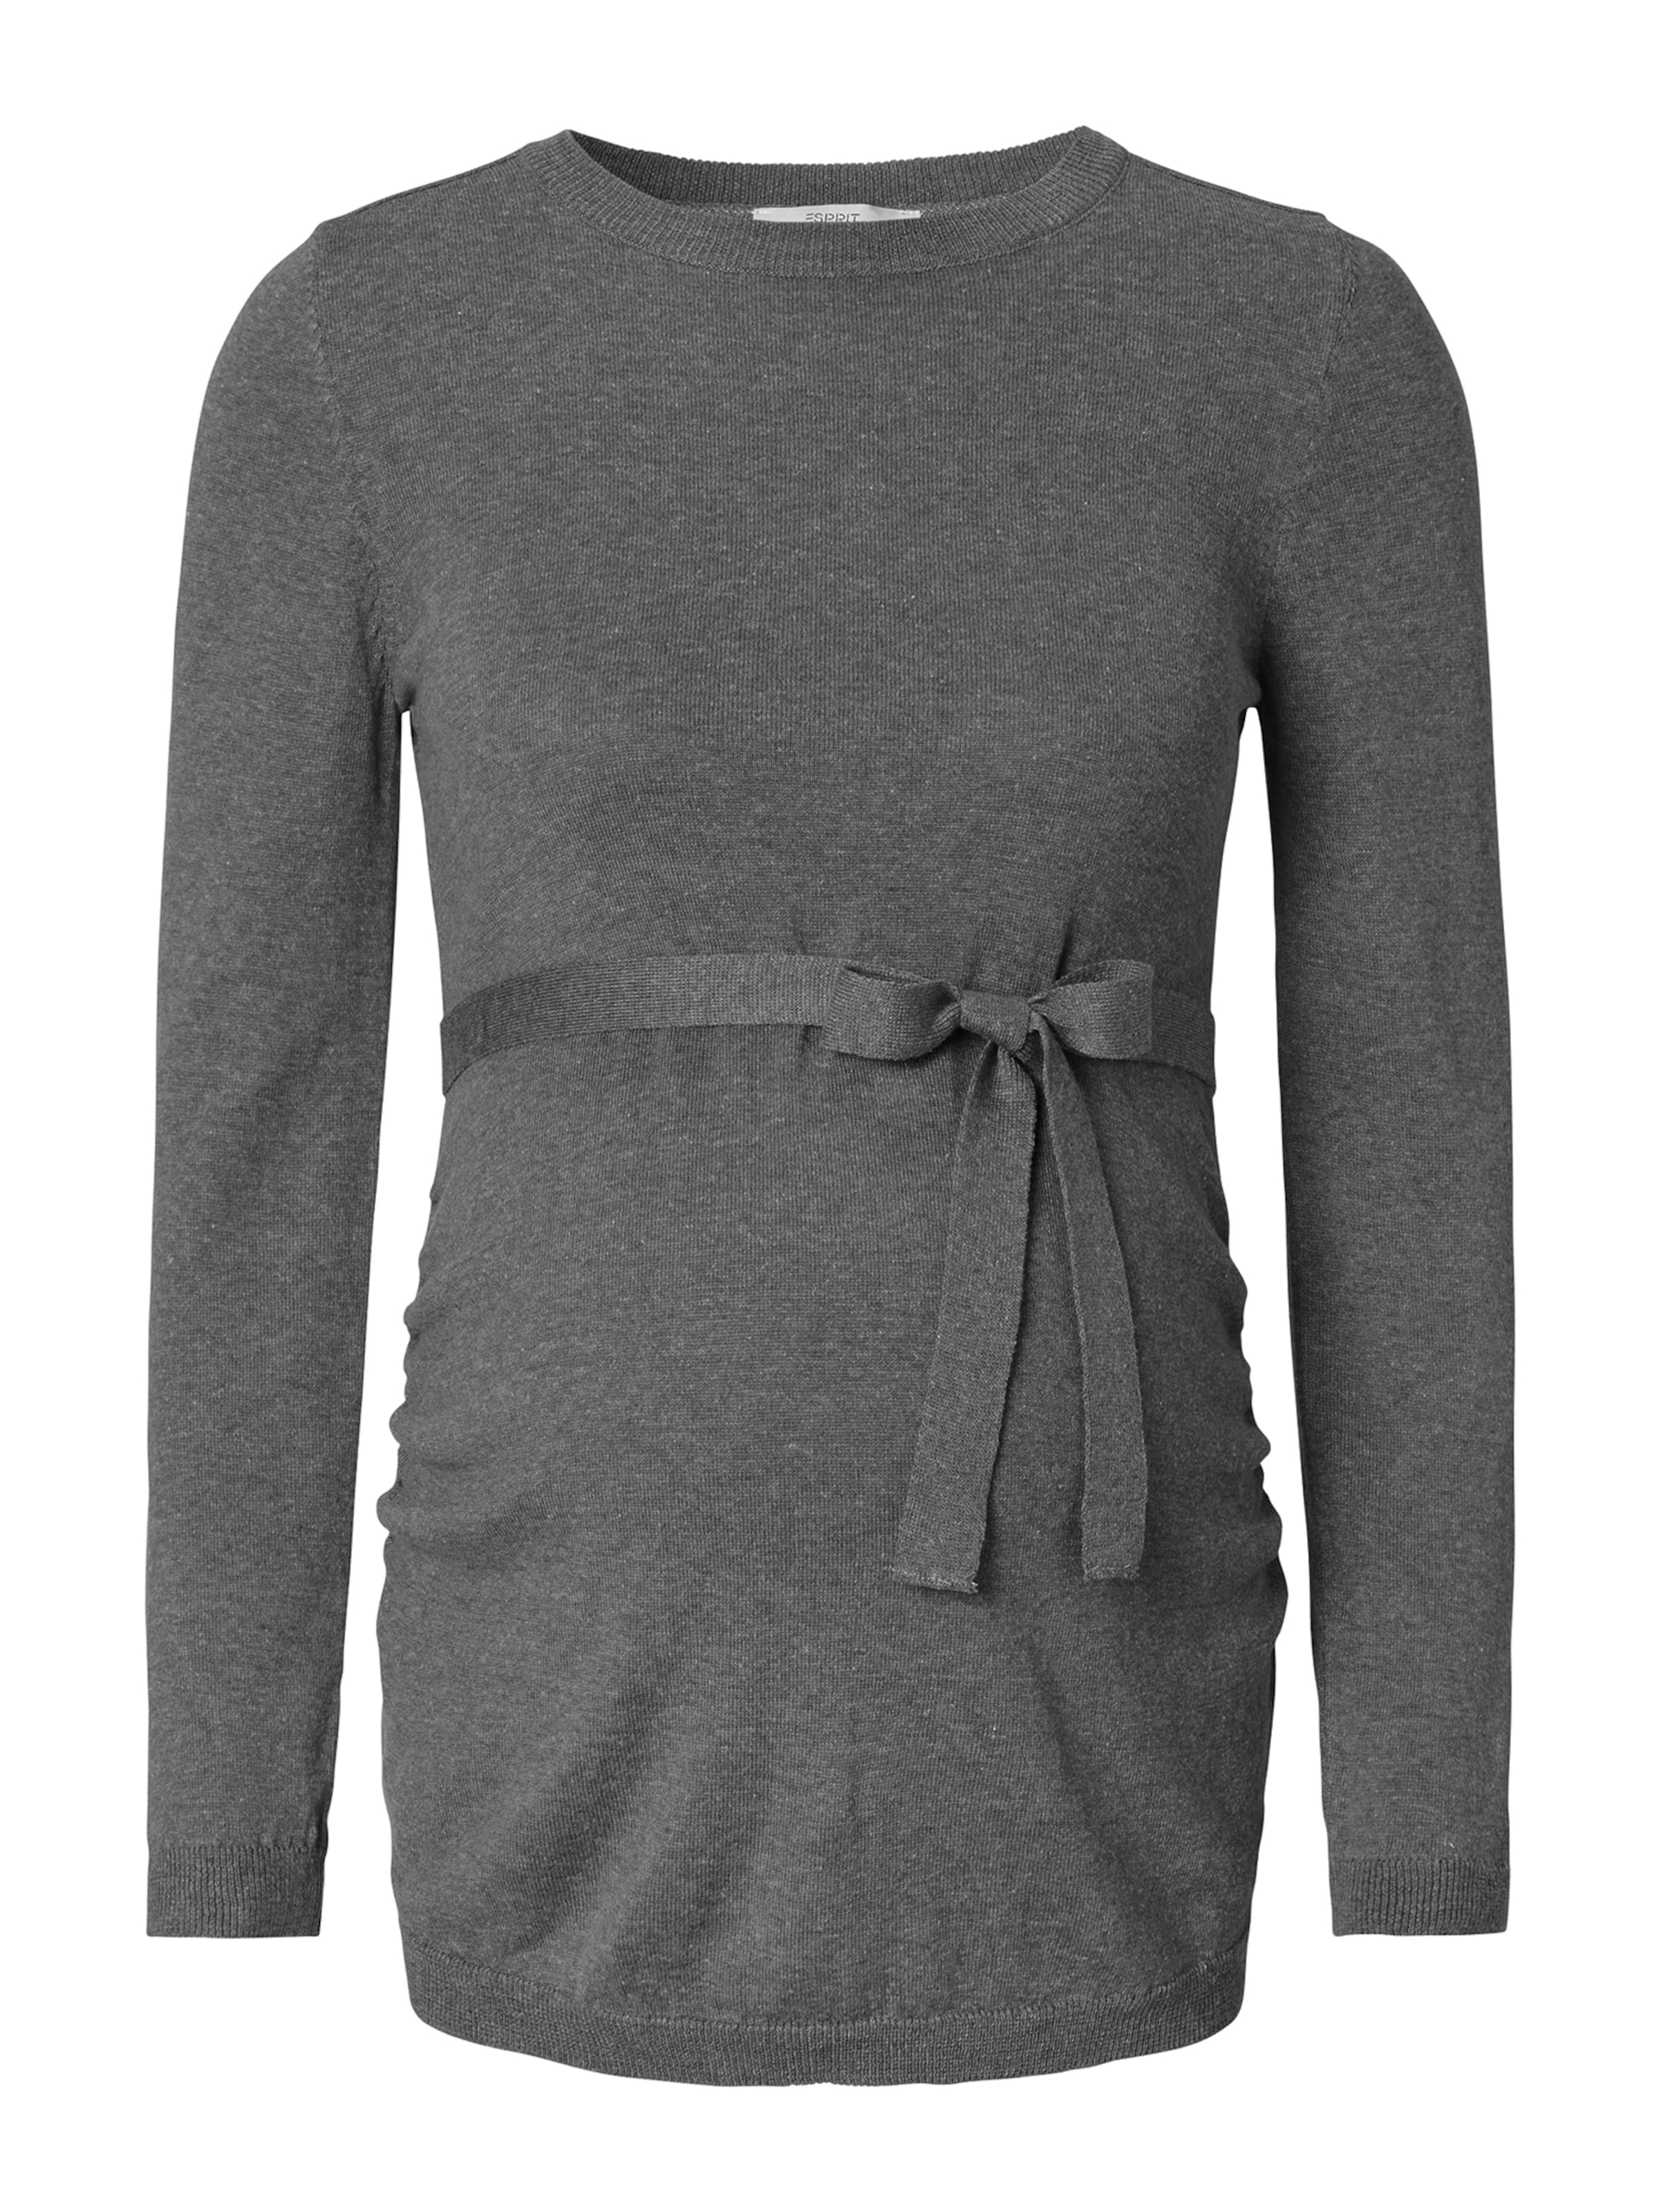 Esprit Maternity Pullover in Graumeliert 